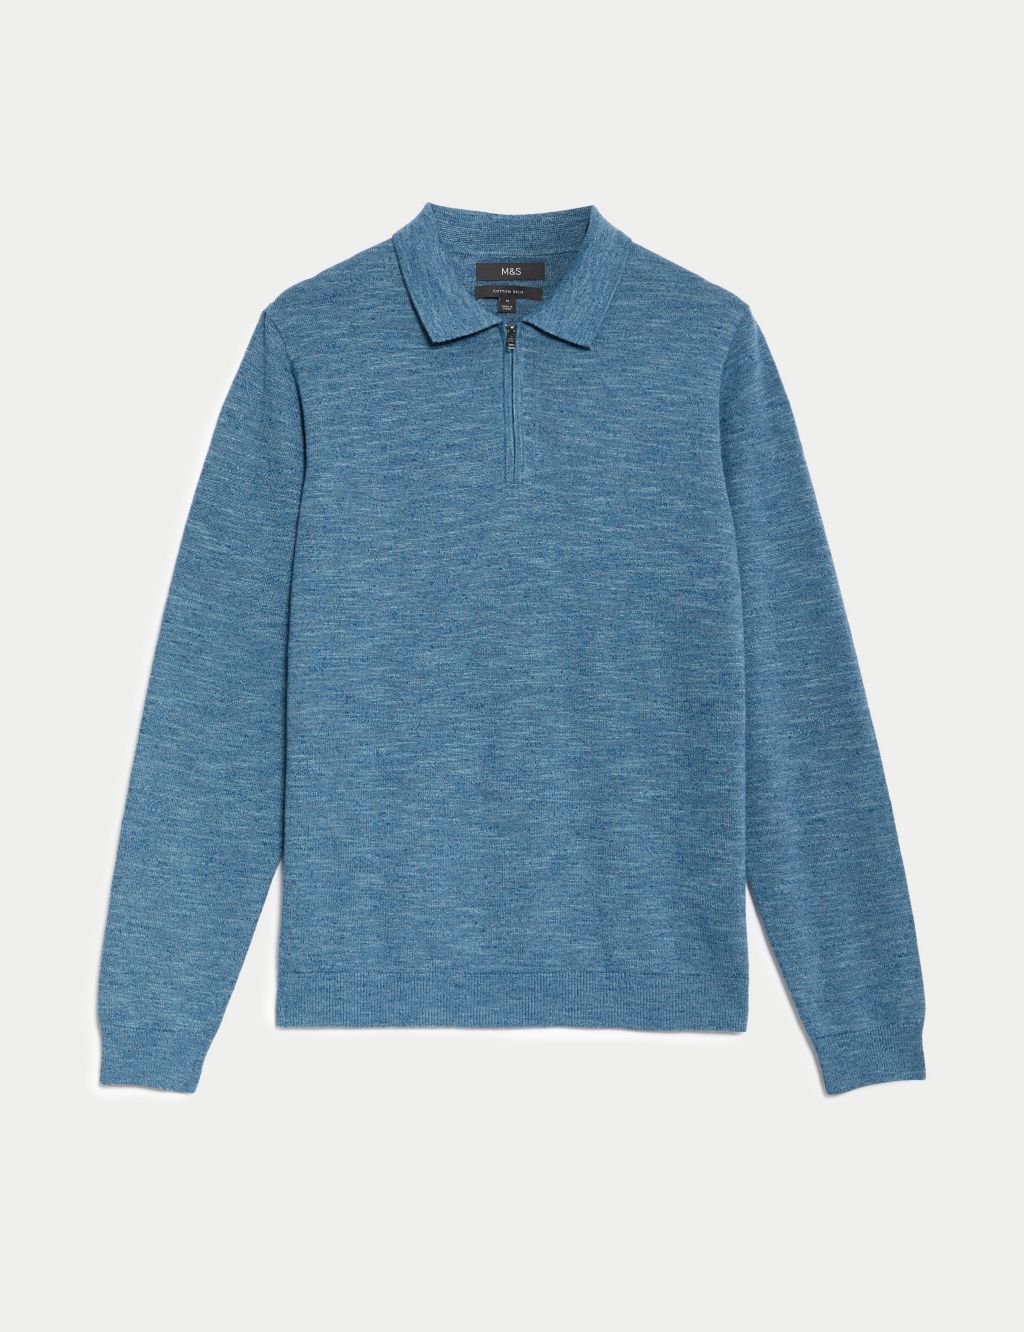 Cotton Rich Zip Up Knitted Polo Shirt image 2